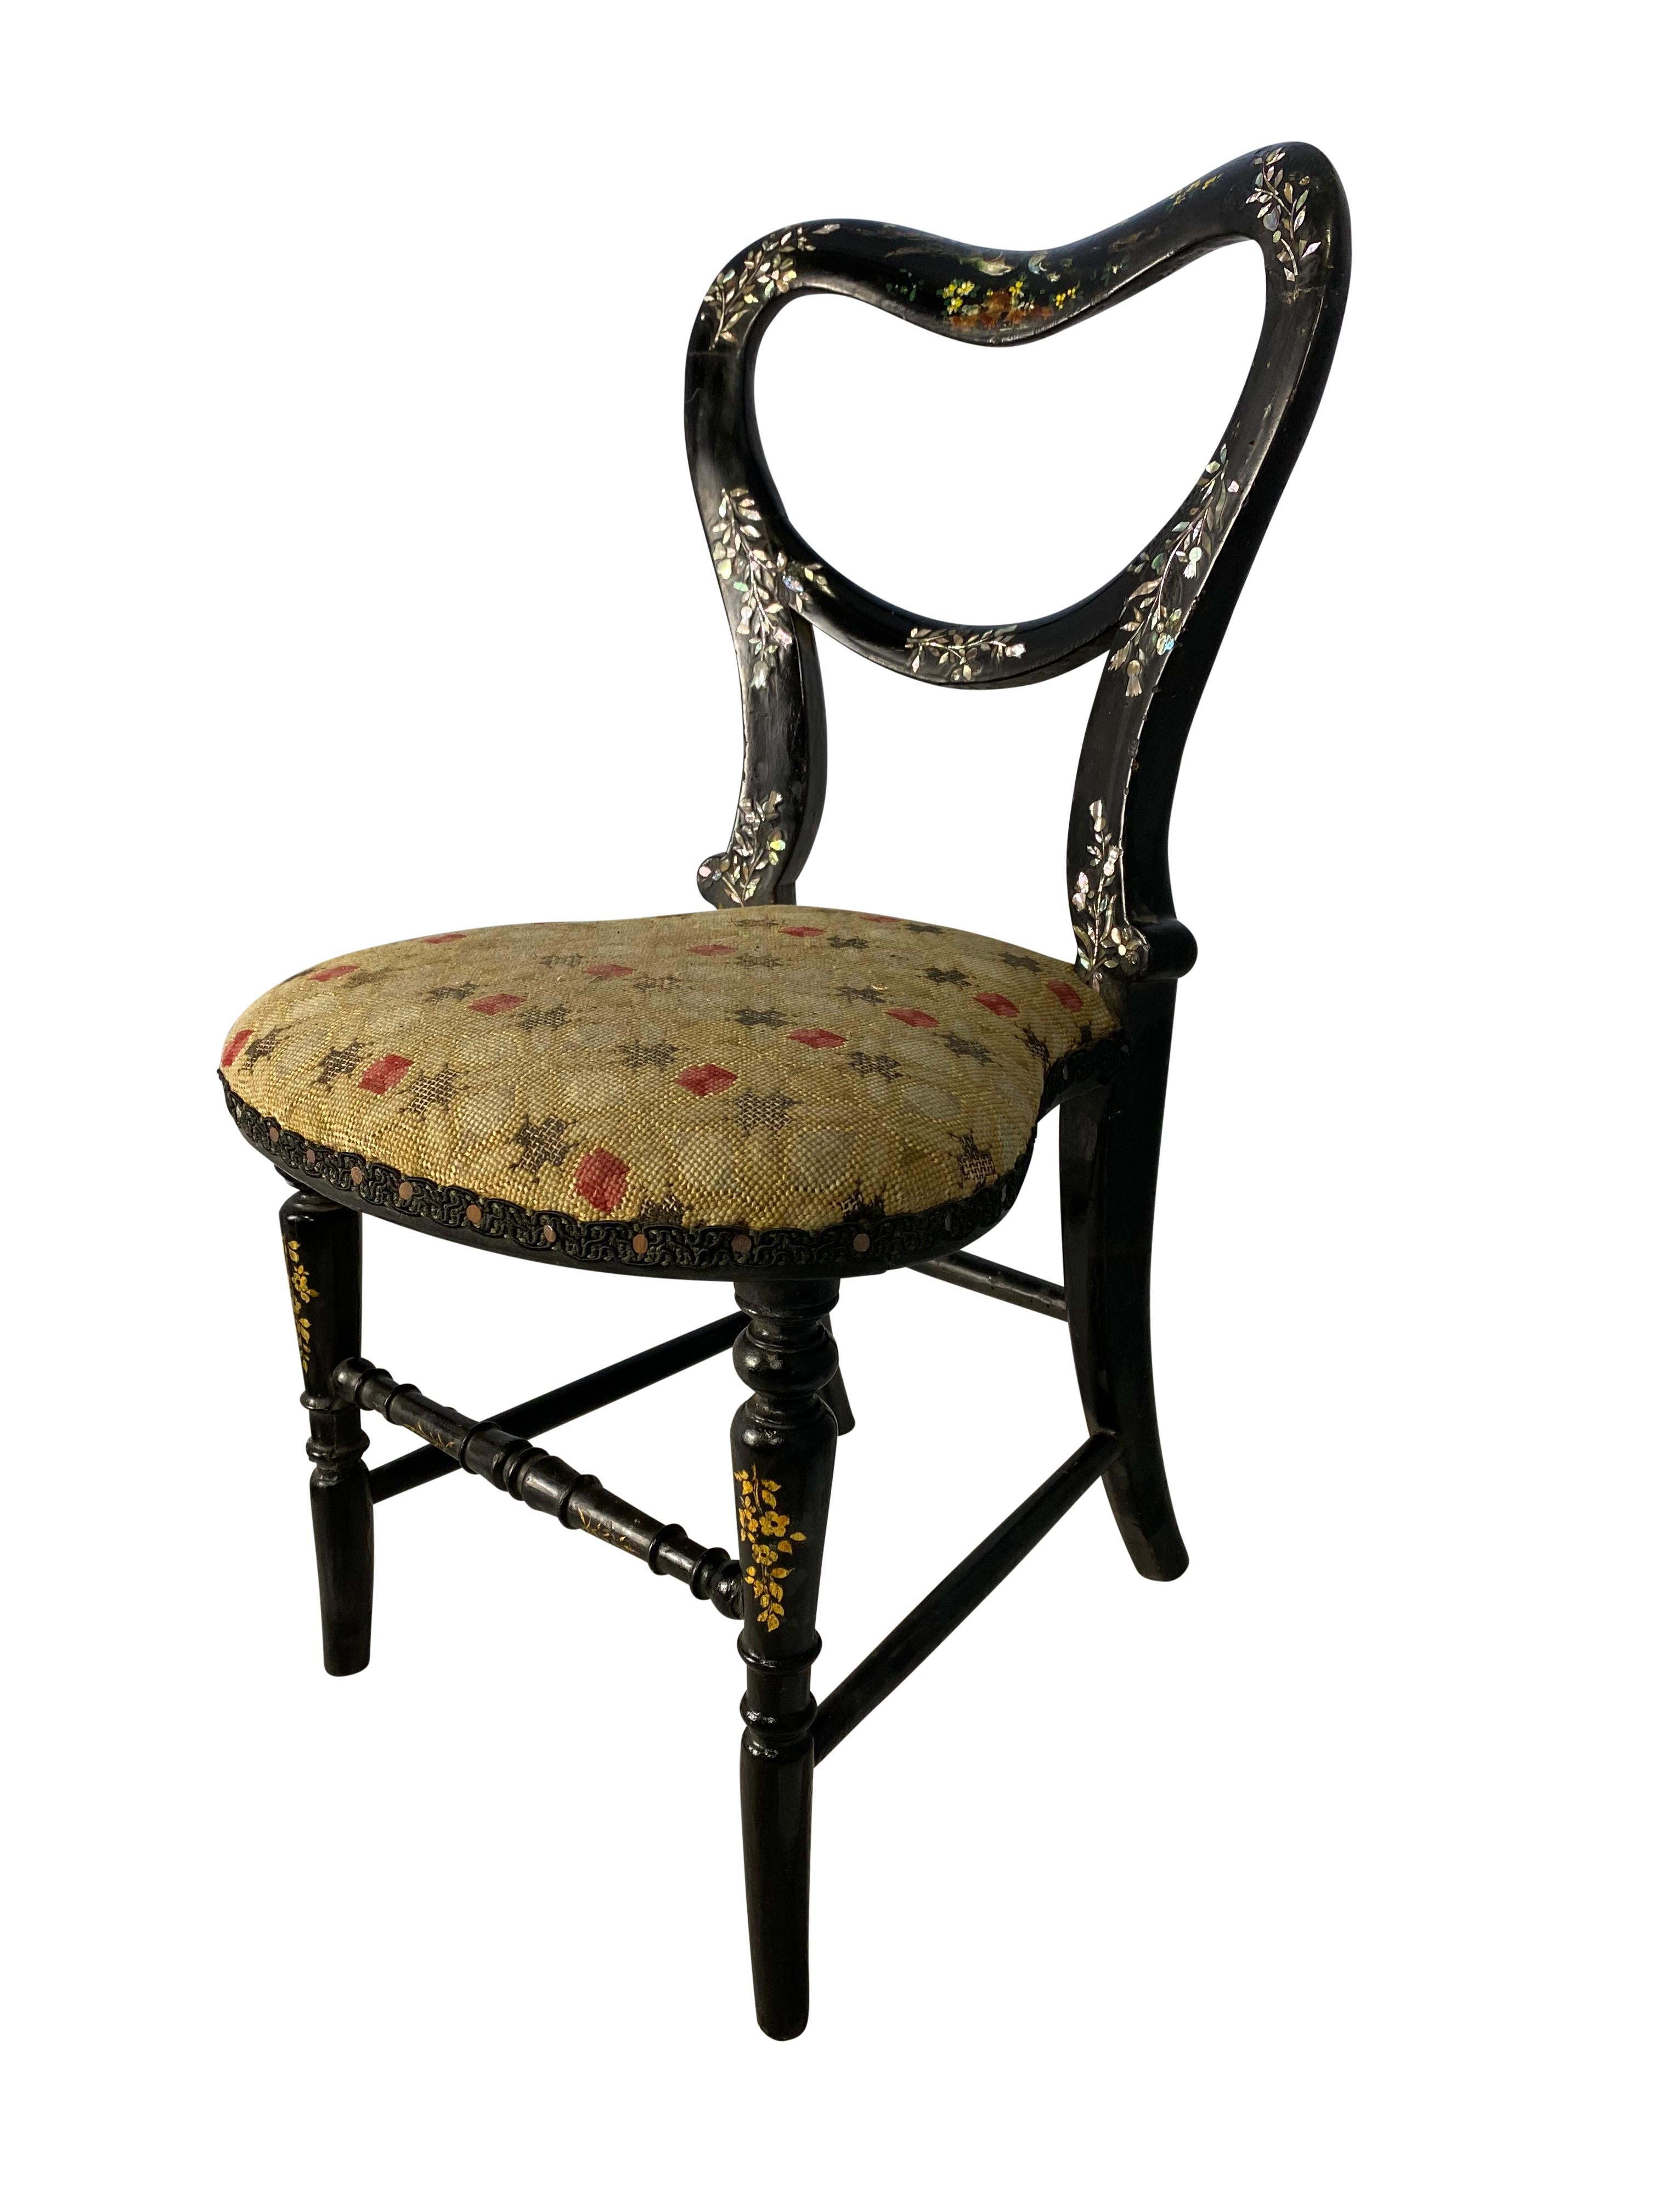 European Hand Painted and Mother of Pearl Inlaid Miniature Chair, 19th Century For Sale